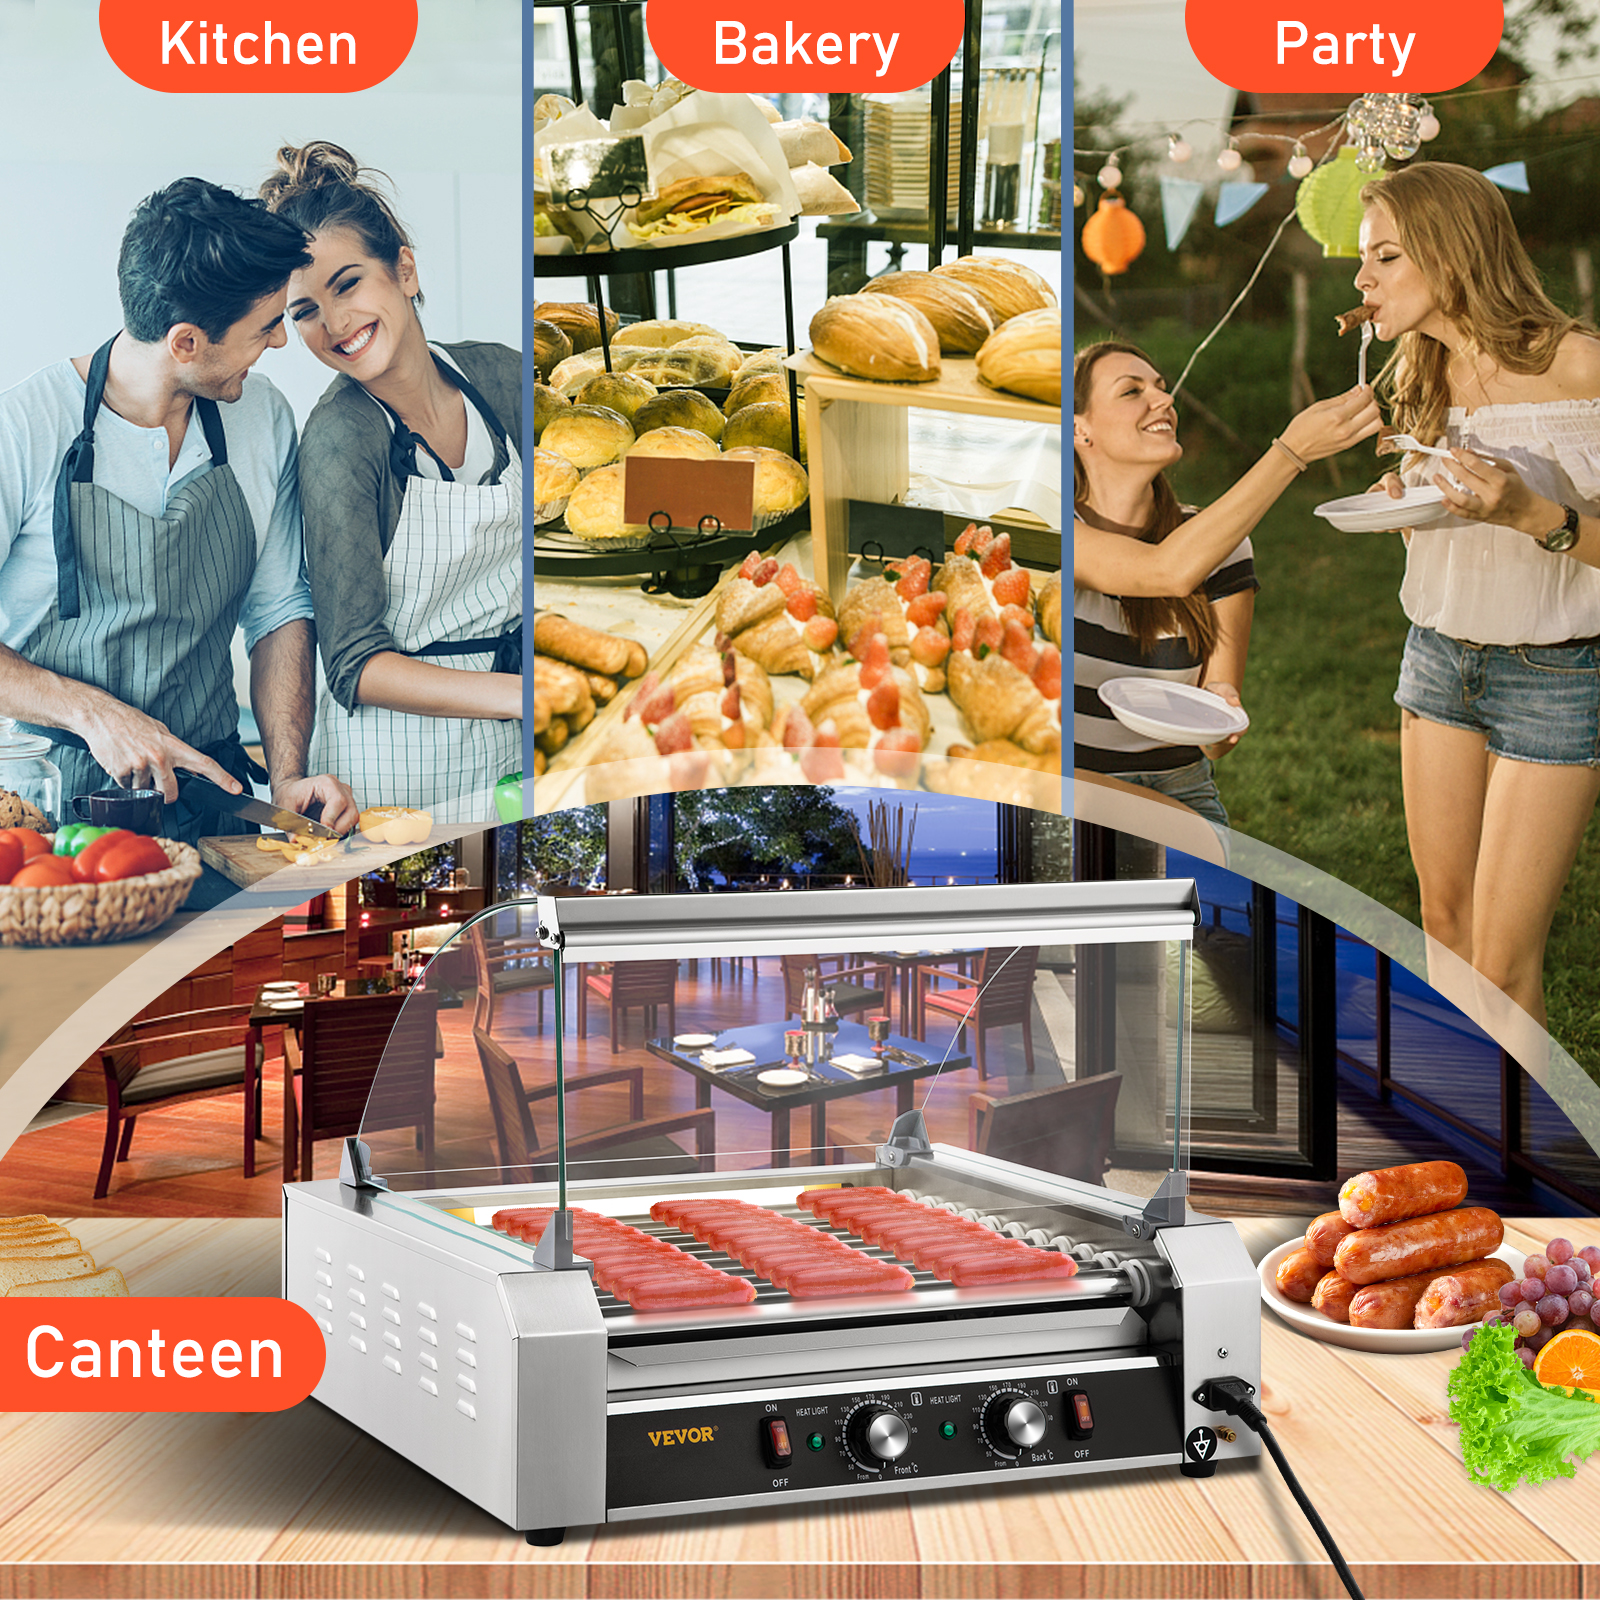 1000W Hot Dog Roller Machine,Dual Temp Control Commercial Grill Cooker  Machine with Removable Stainless Steel Drip Tray and Cover, 12 Hot Dog 5